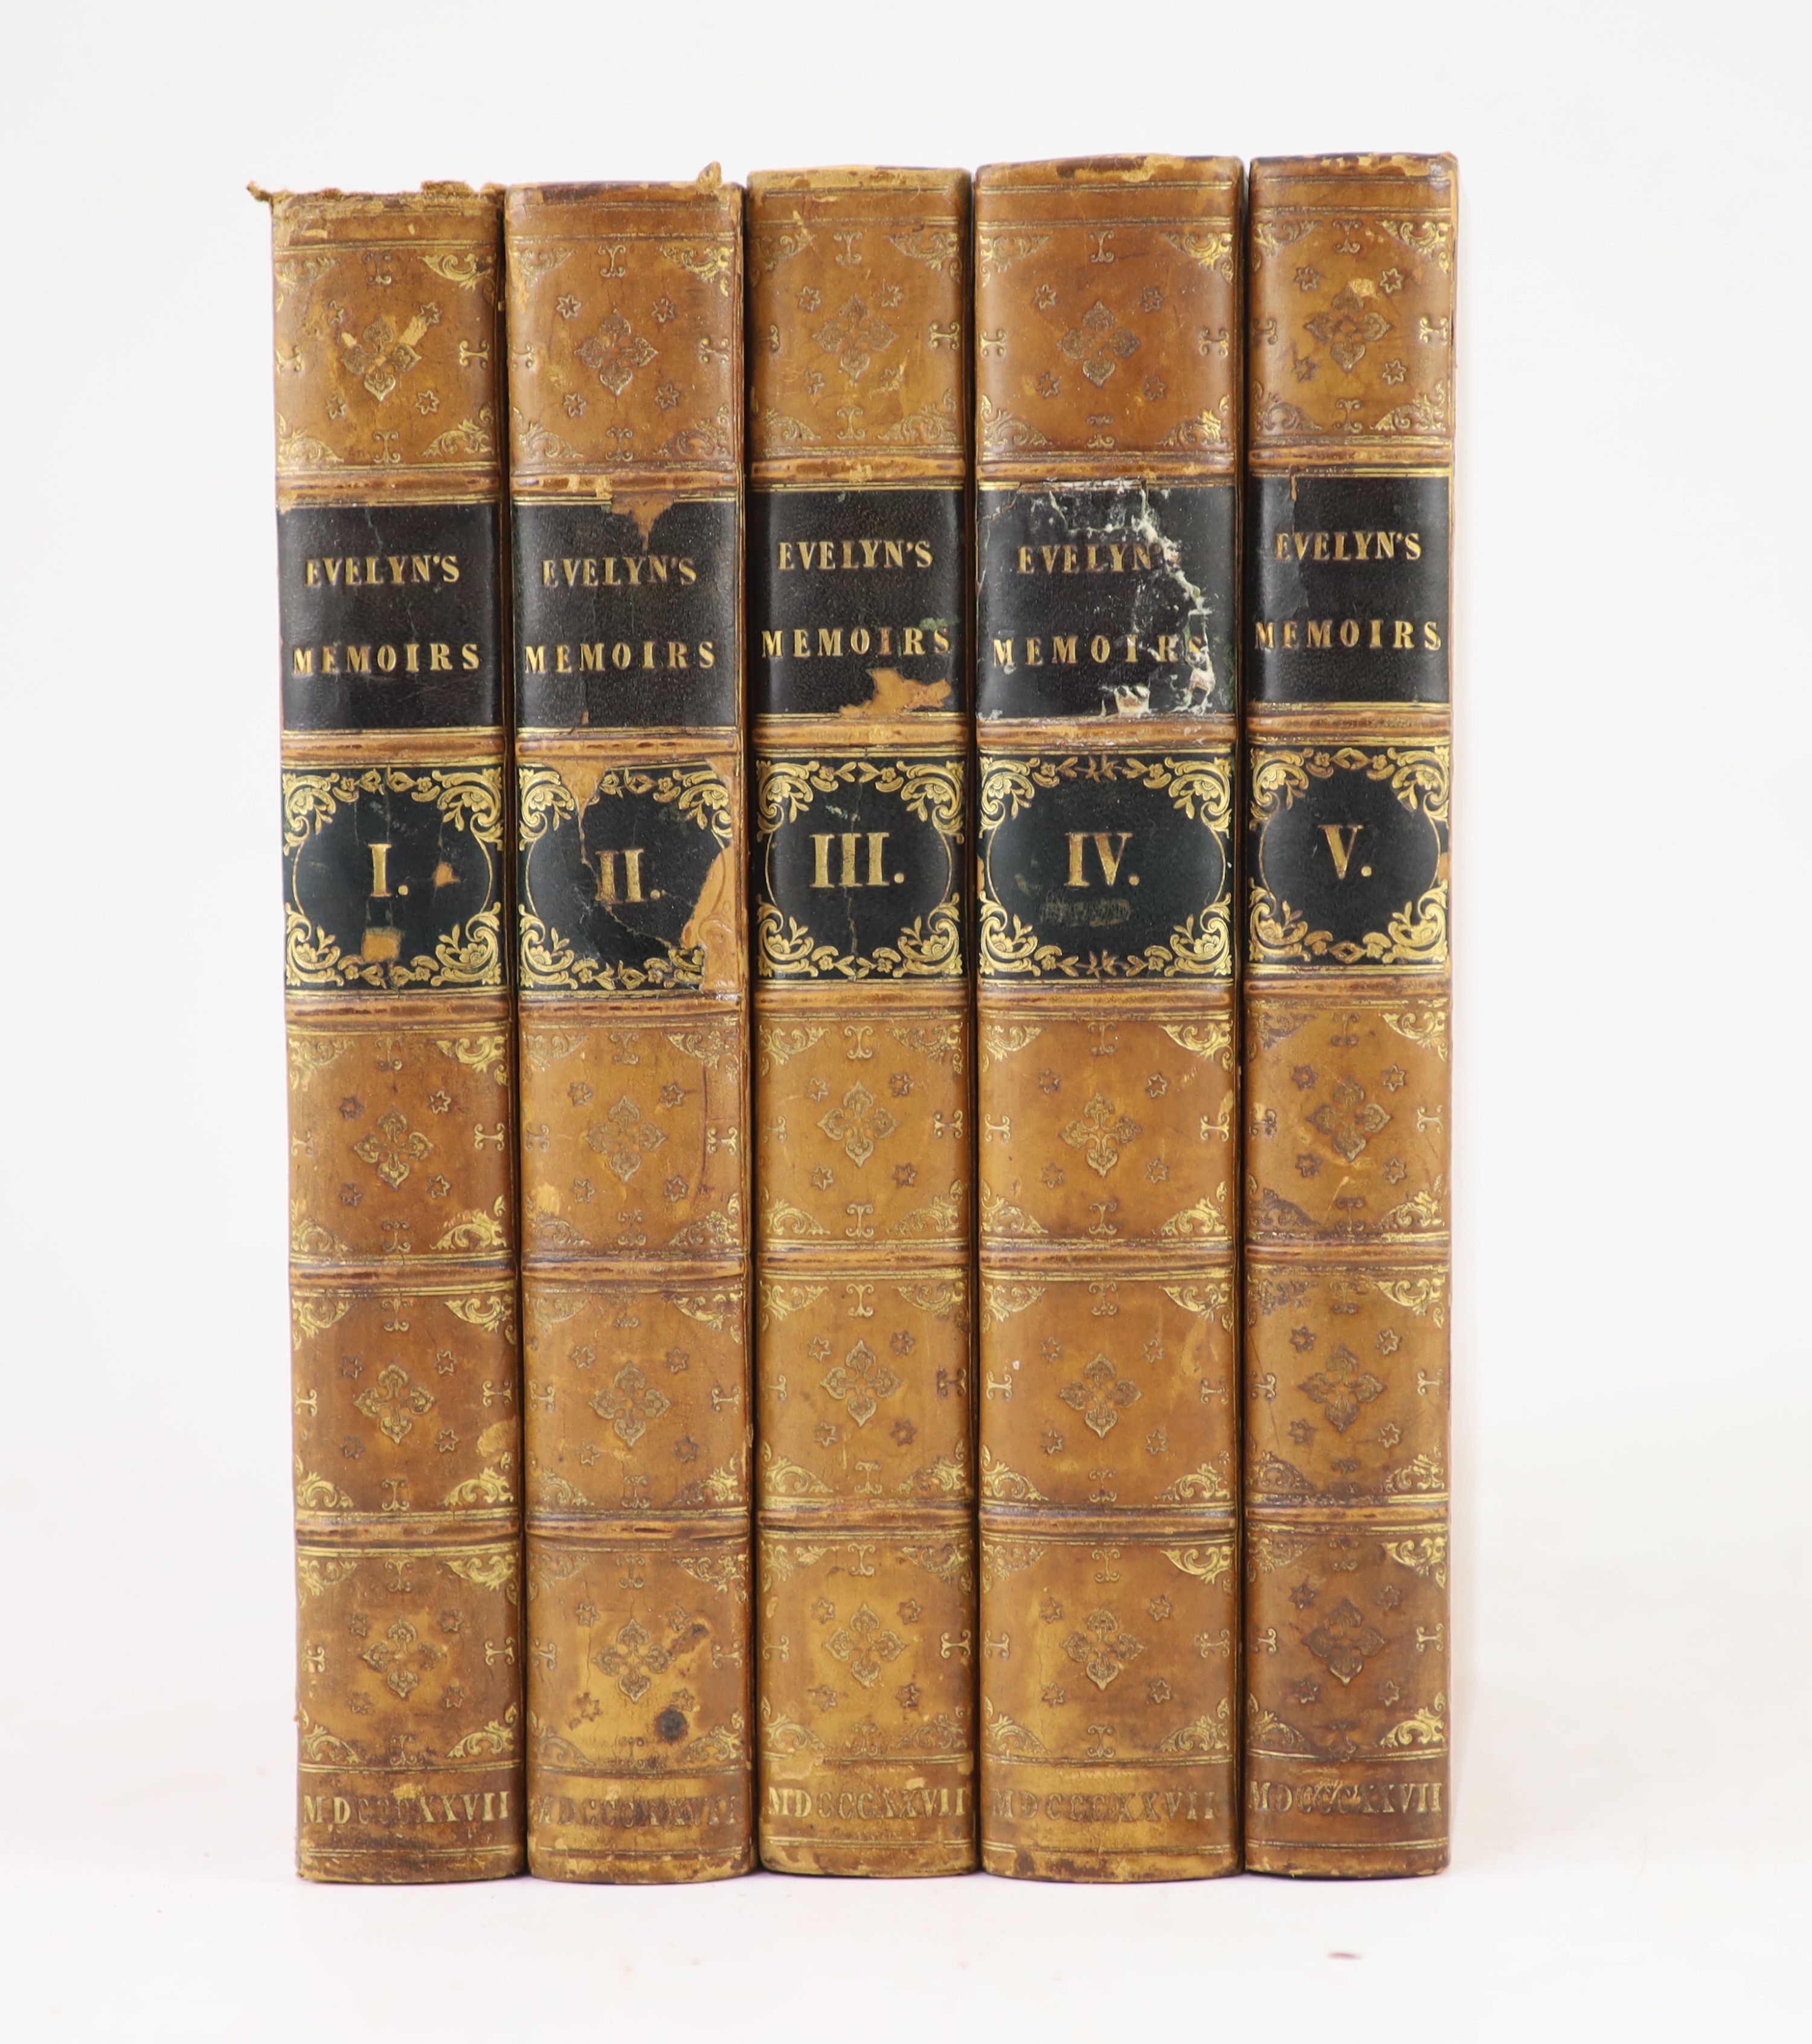 Bray, William (editor) - Memoirs of John Evelyn, Esq; F.R.S. Author of the “Sylva”… Comprising his diary, from 1641 to 1705-6… A new edition, 5 vols. Complete with 10 engraved plates, 3 of which are folding. Uniformly bo